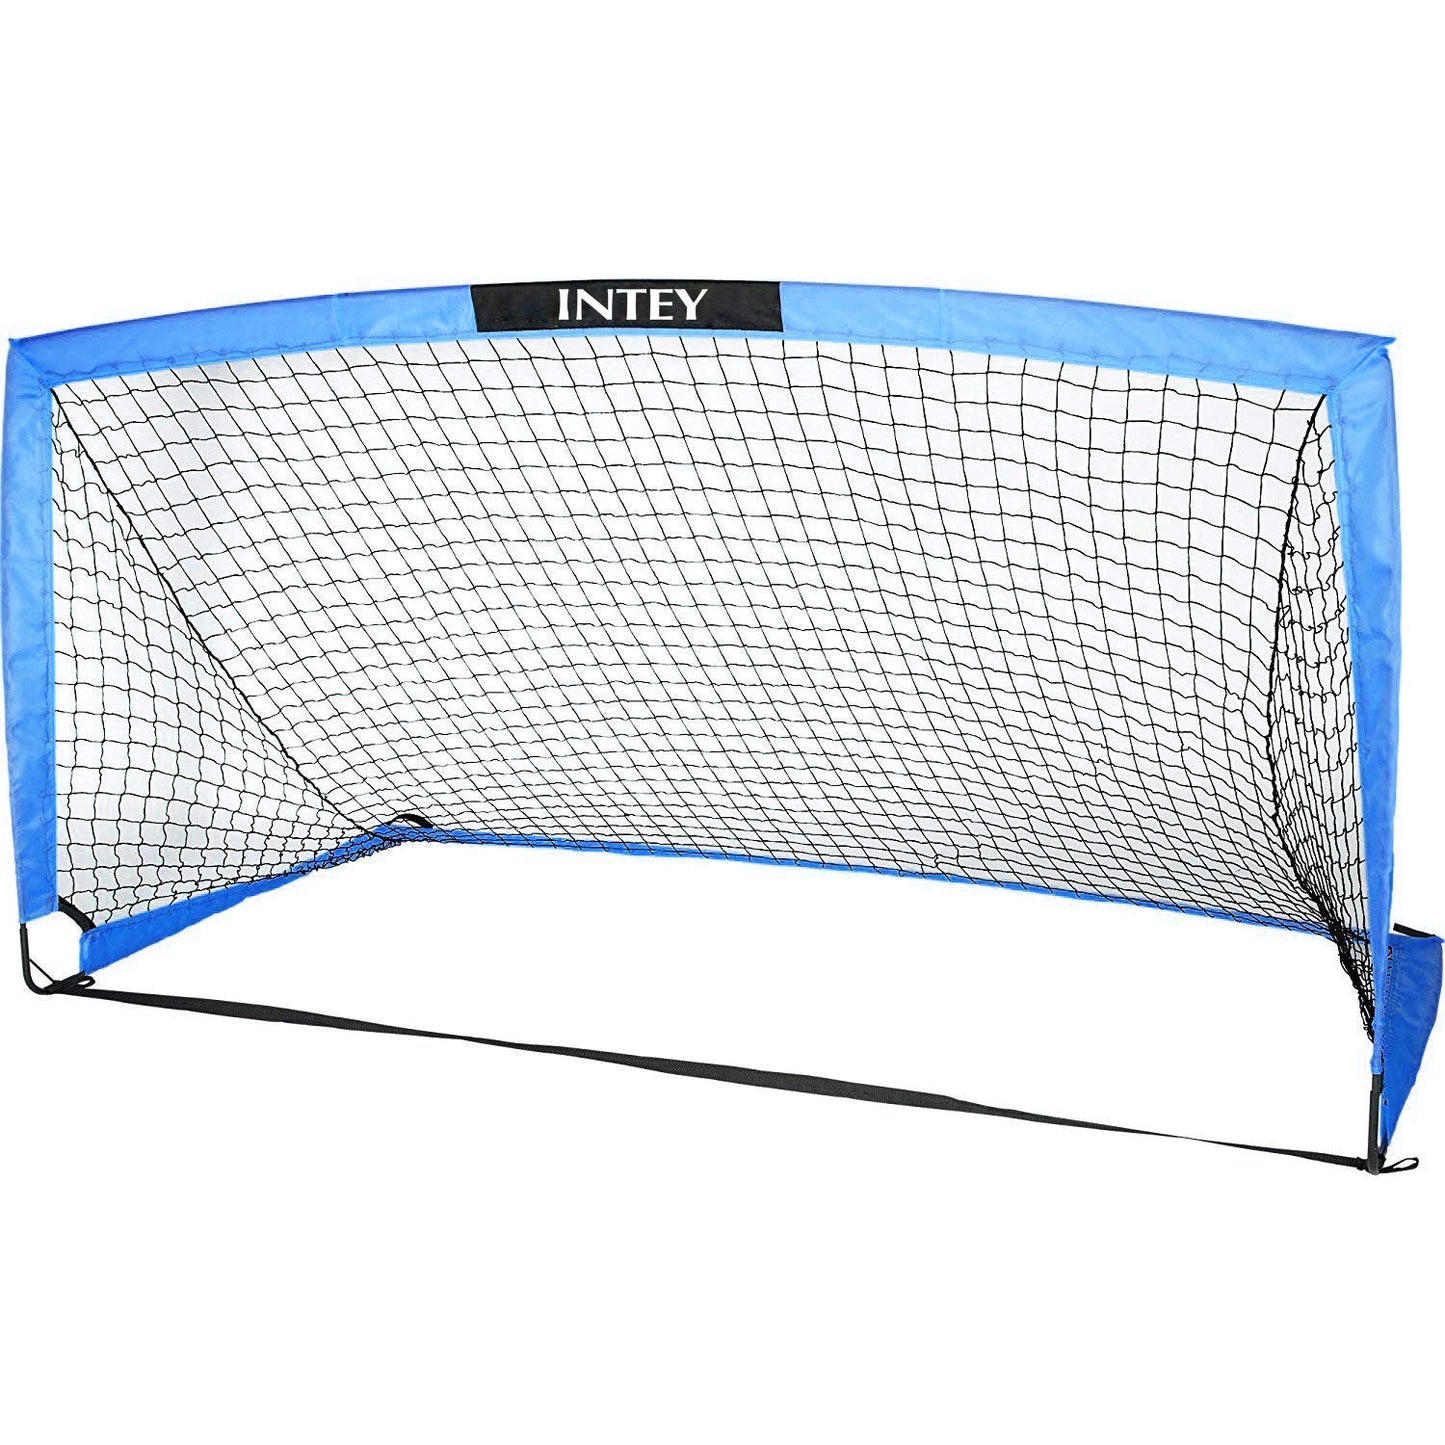 intey Soccer Goal 6 Ft. 6' In. x 3 Ft. 3 In. Portable Soccer Net with Carry Bag for Games and Training for Kids and Teens